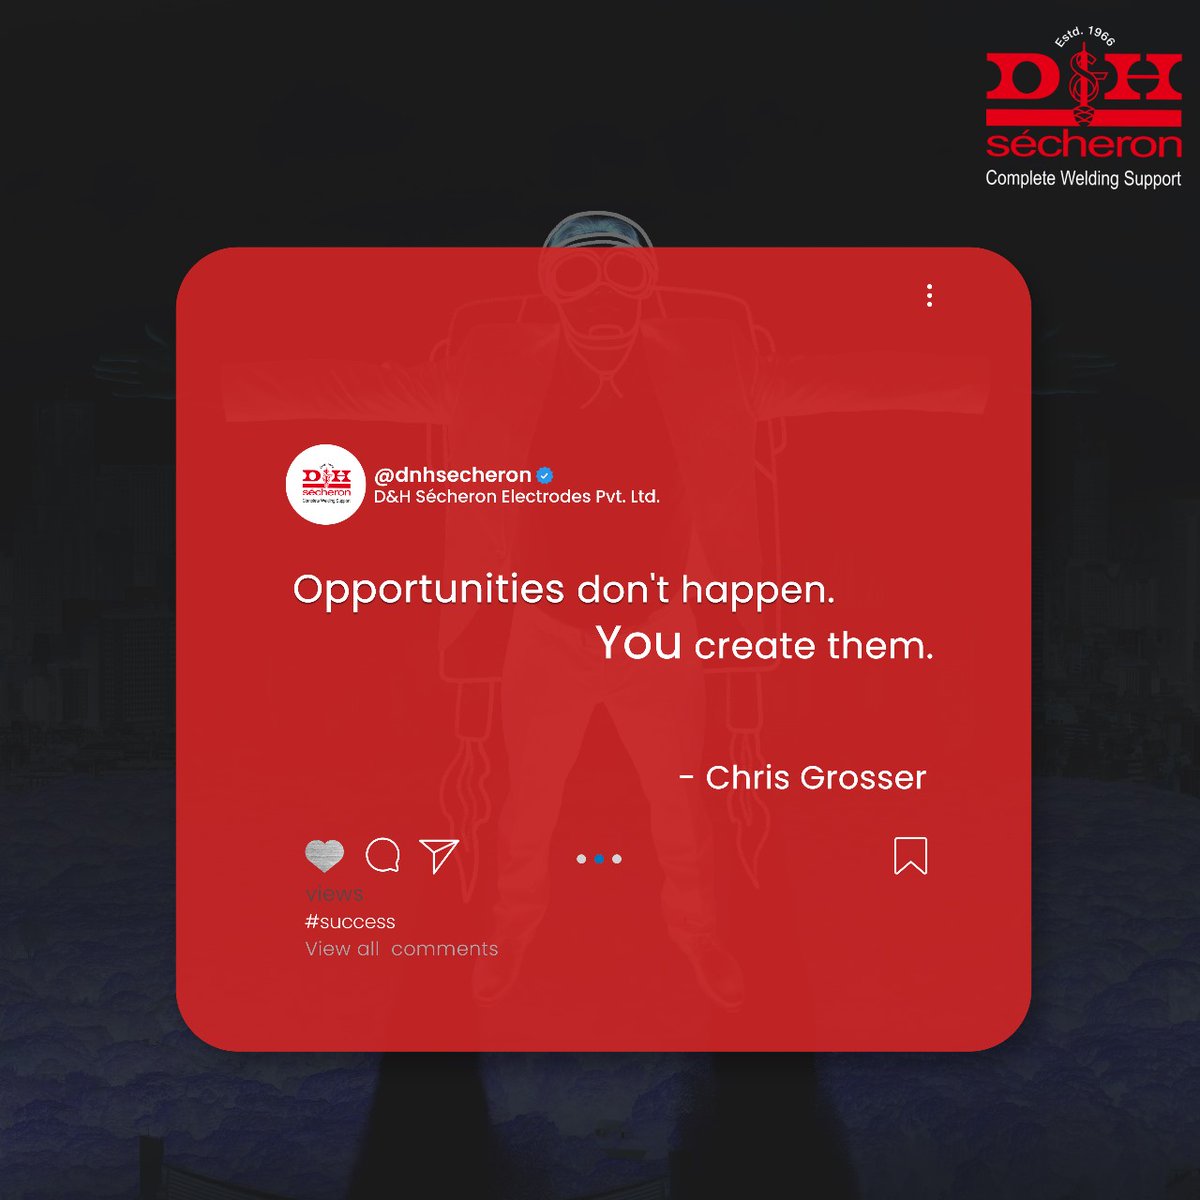 Opportunities are the product of action, not chance. Make your own destiny.

#DnHSecheron #Welding #MondayMotivation #Opportunity #Opportunities #Success #SecretofSuccess #MotivateYourself #Motivate